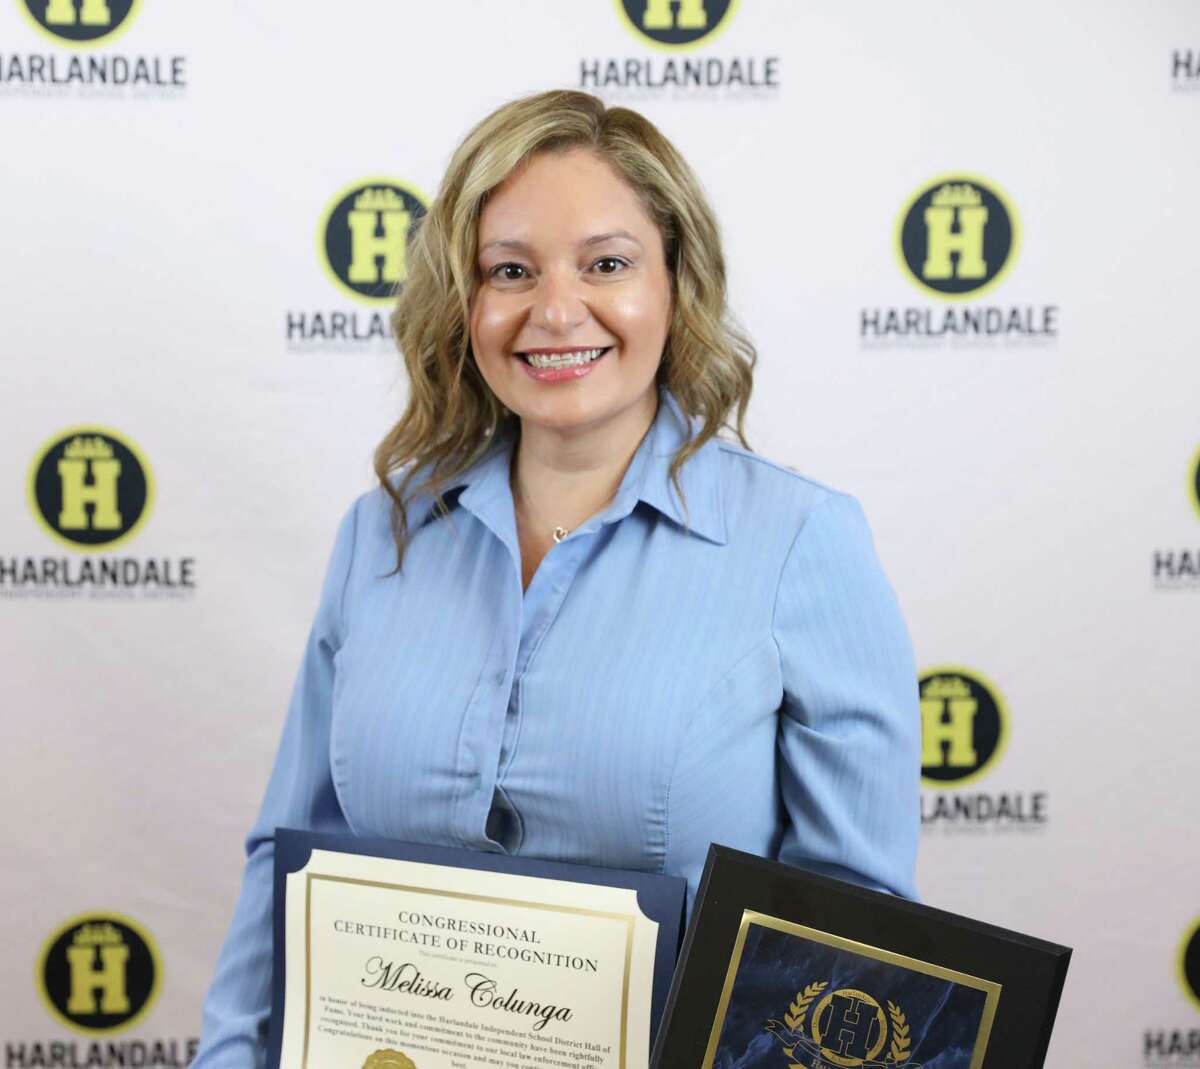 Melissa Colunga is a recent inductee of the Harlandale ISD Hall of Fame. She is a 1997 graduate of the Frank Tejeda Academy.